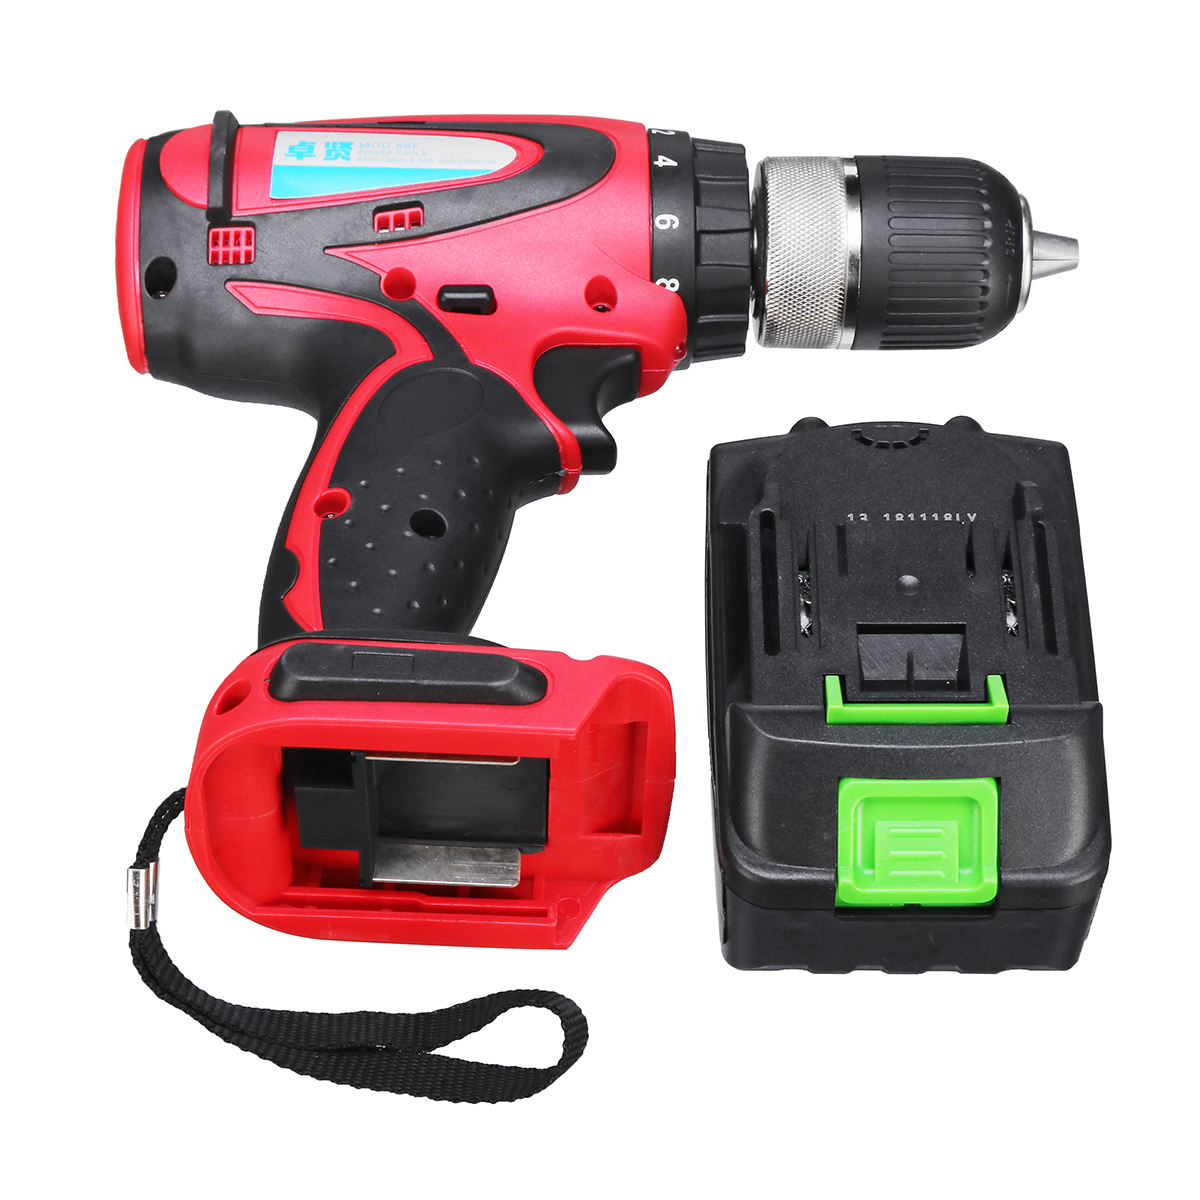 68V-10Ah-Cordless-Rechargeable-Electric-Drill-2-Speed-Heavy-Duty-Torque-Power-Drills-1403940-6